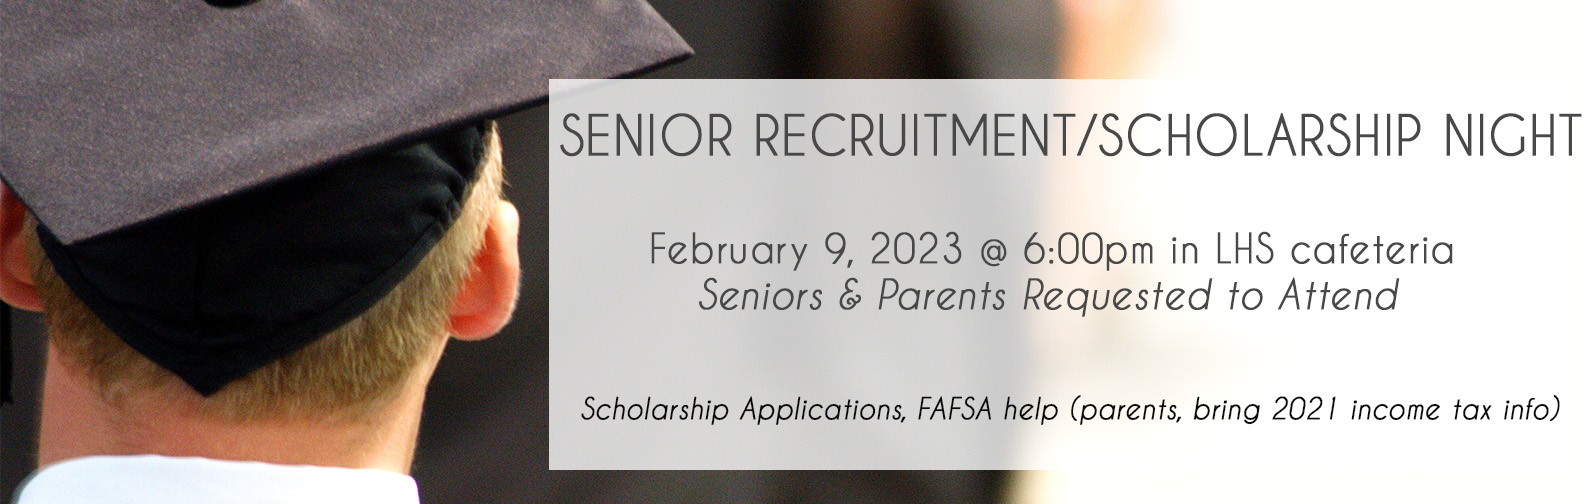 Senior Recruitment /Scholarship Night  February 9, 2023 at 6:00 pm in LHS Cafeteria.  Senior and Parents are requested to attend.  Scholarship applications, FAFSA help (Parents bring 2021 income tax information)